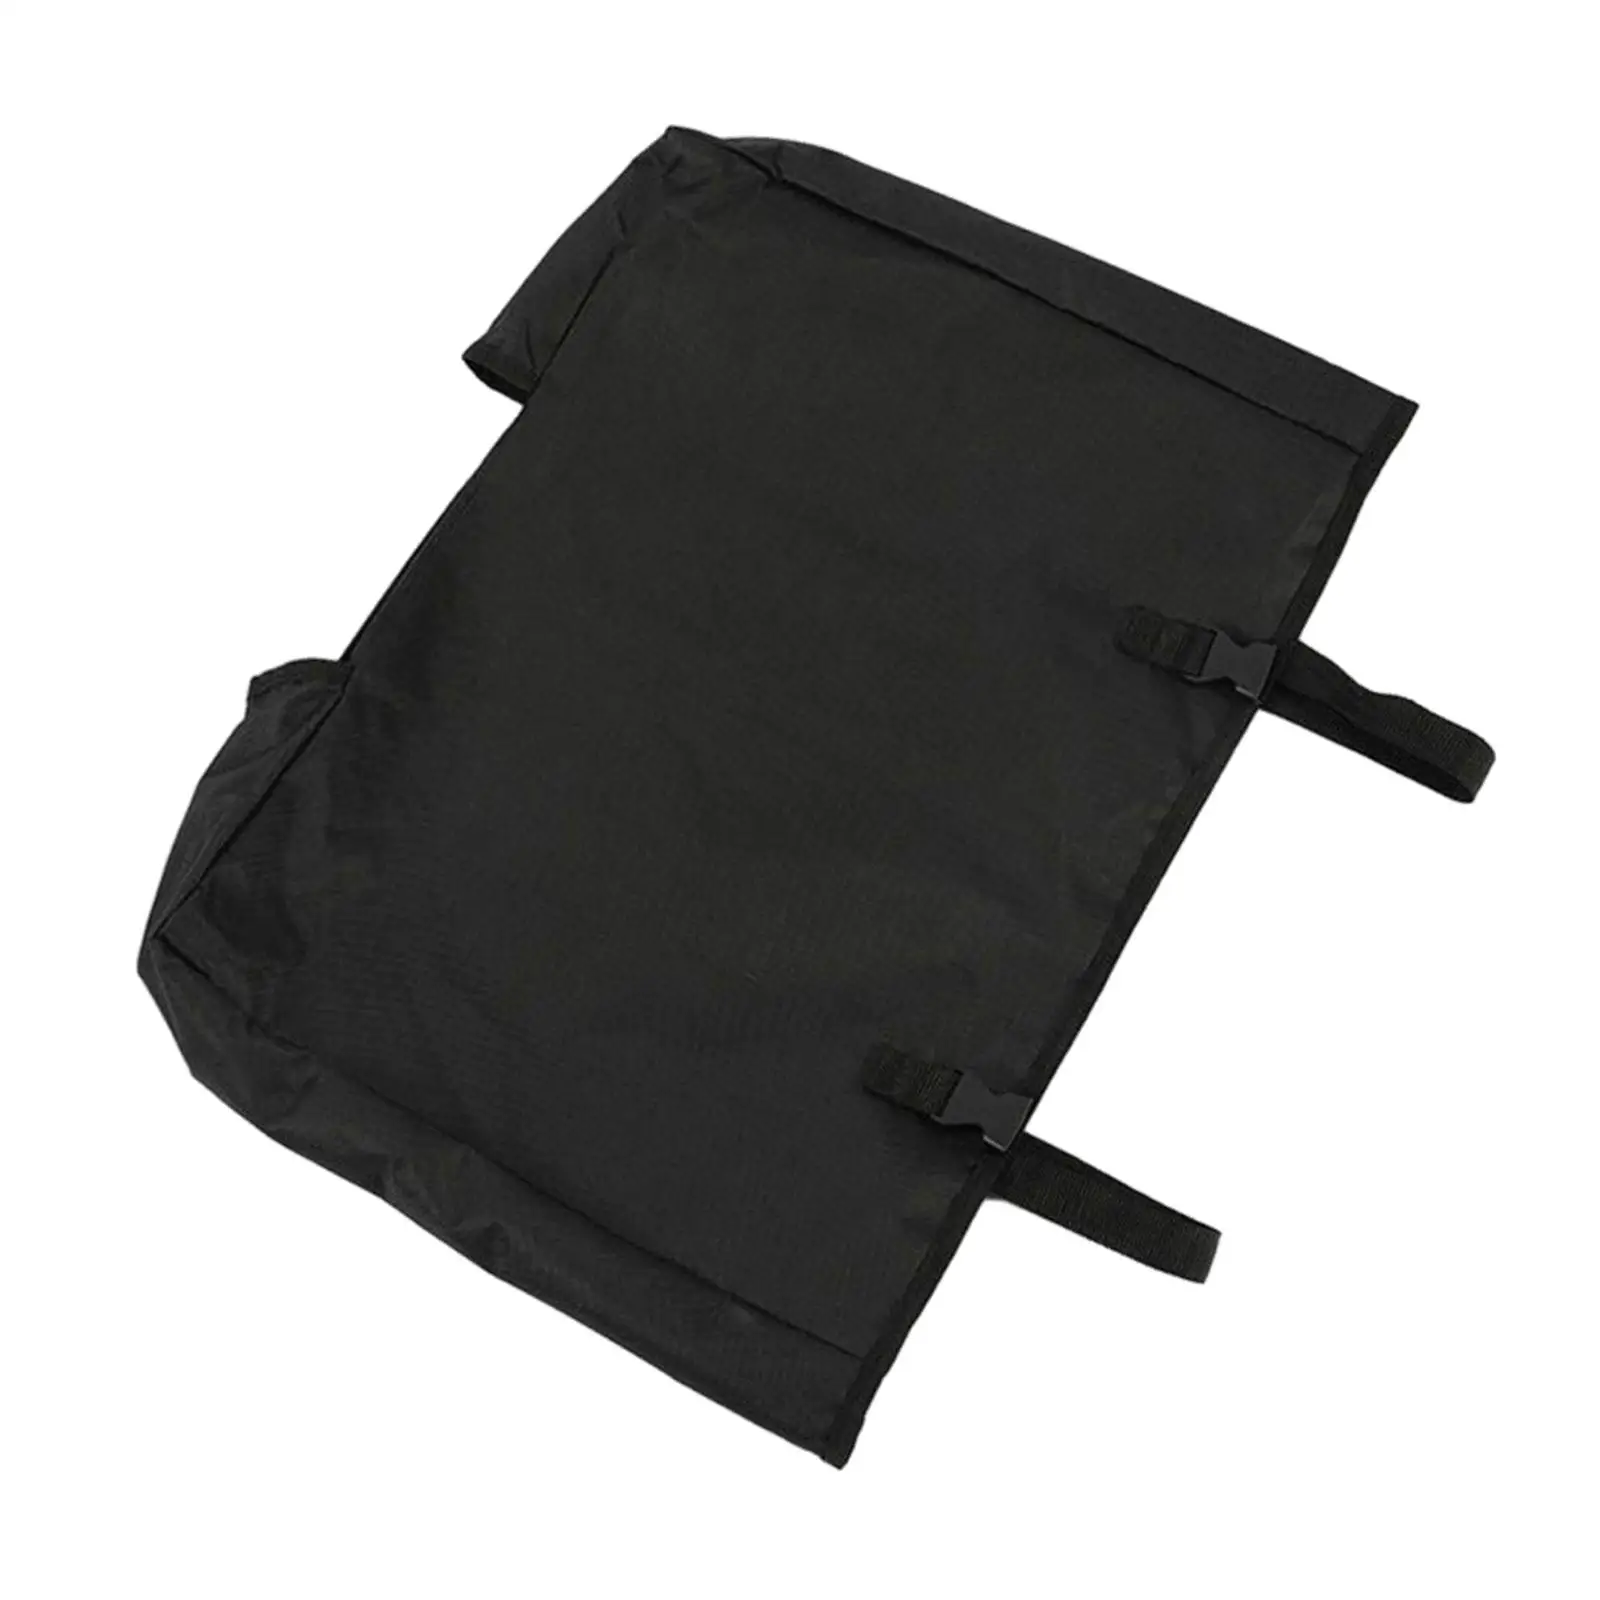 Folding Utility Wagon Cover Collapsible Wagon Folding Folding Cart Cover